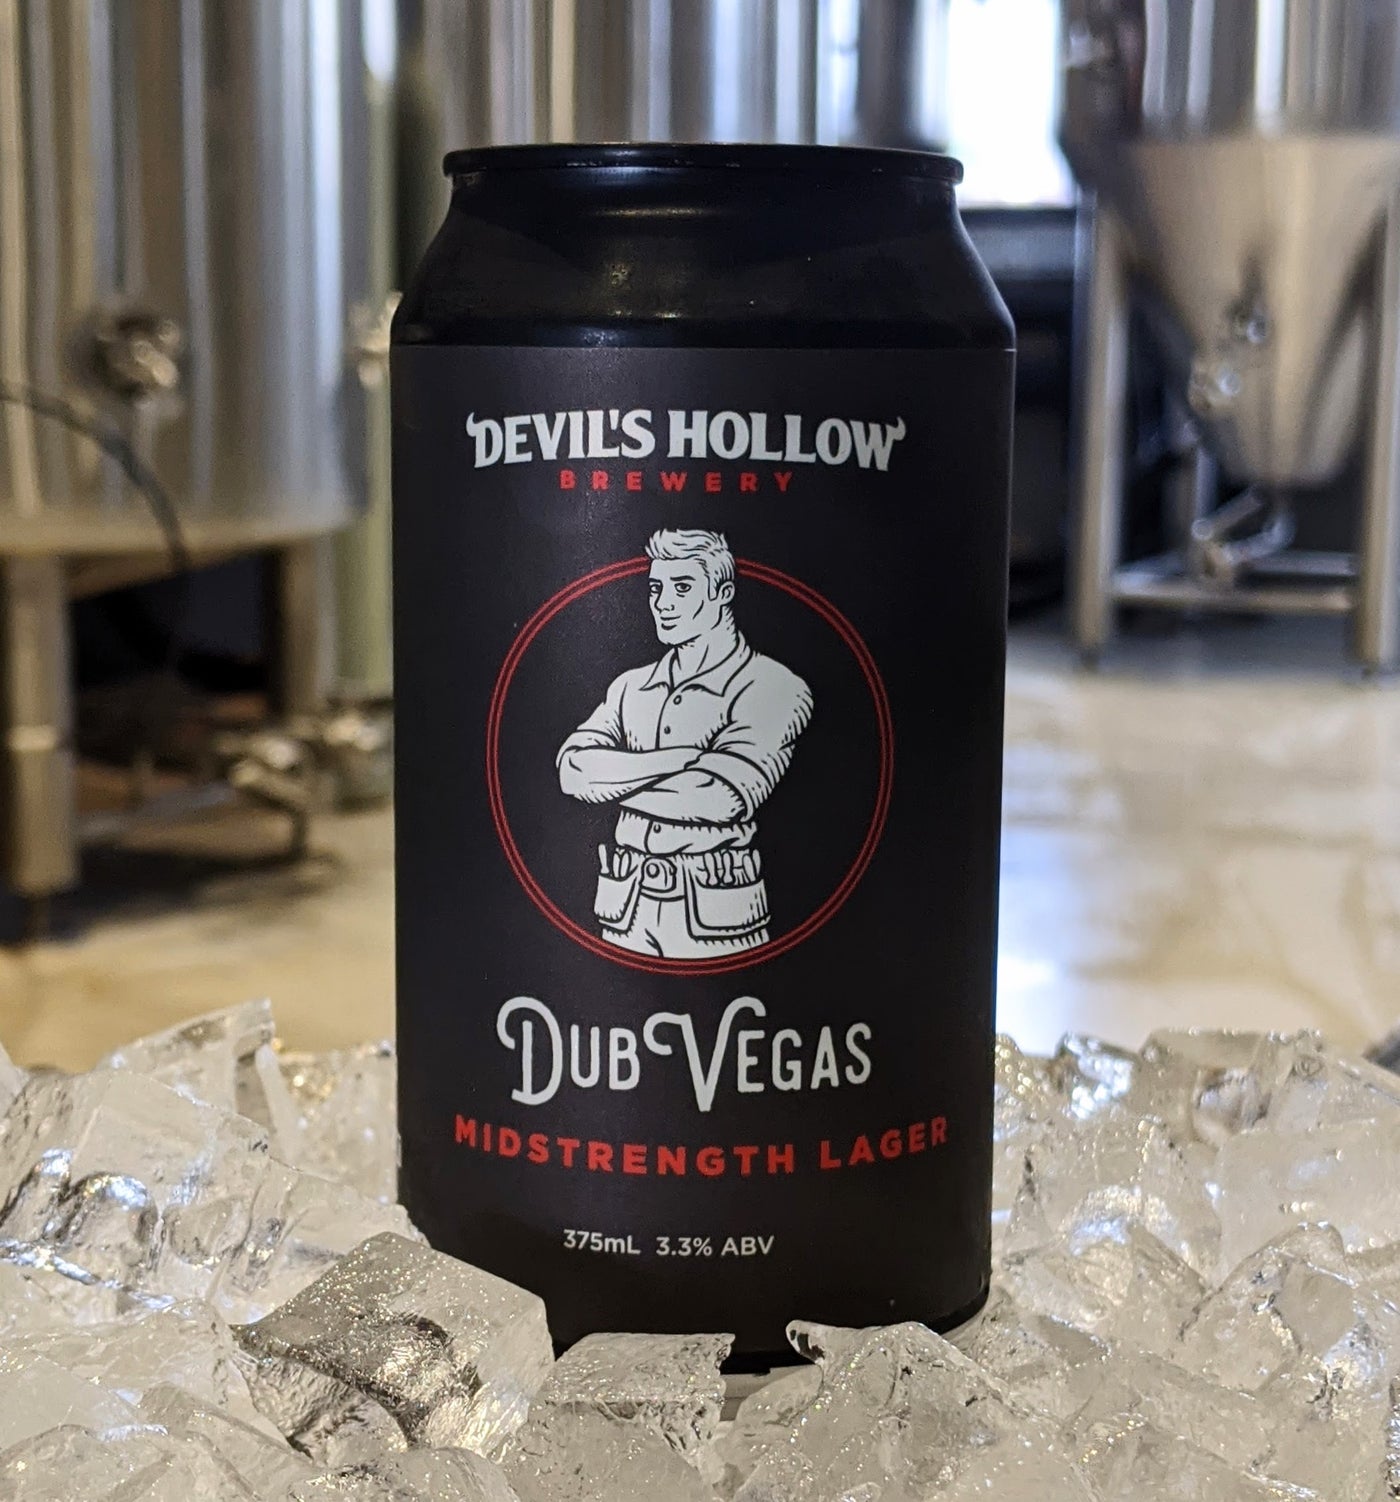 Dub Vegas Mid Strength Lager - Devils Hollow Brewery